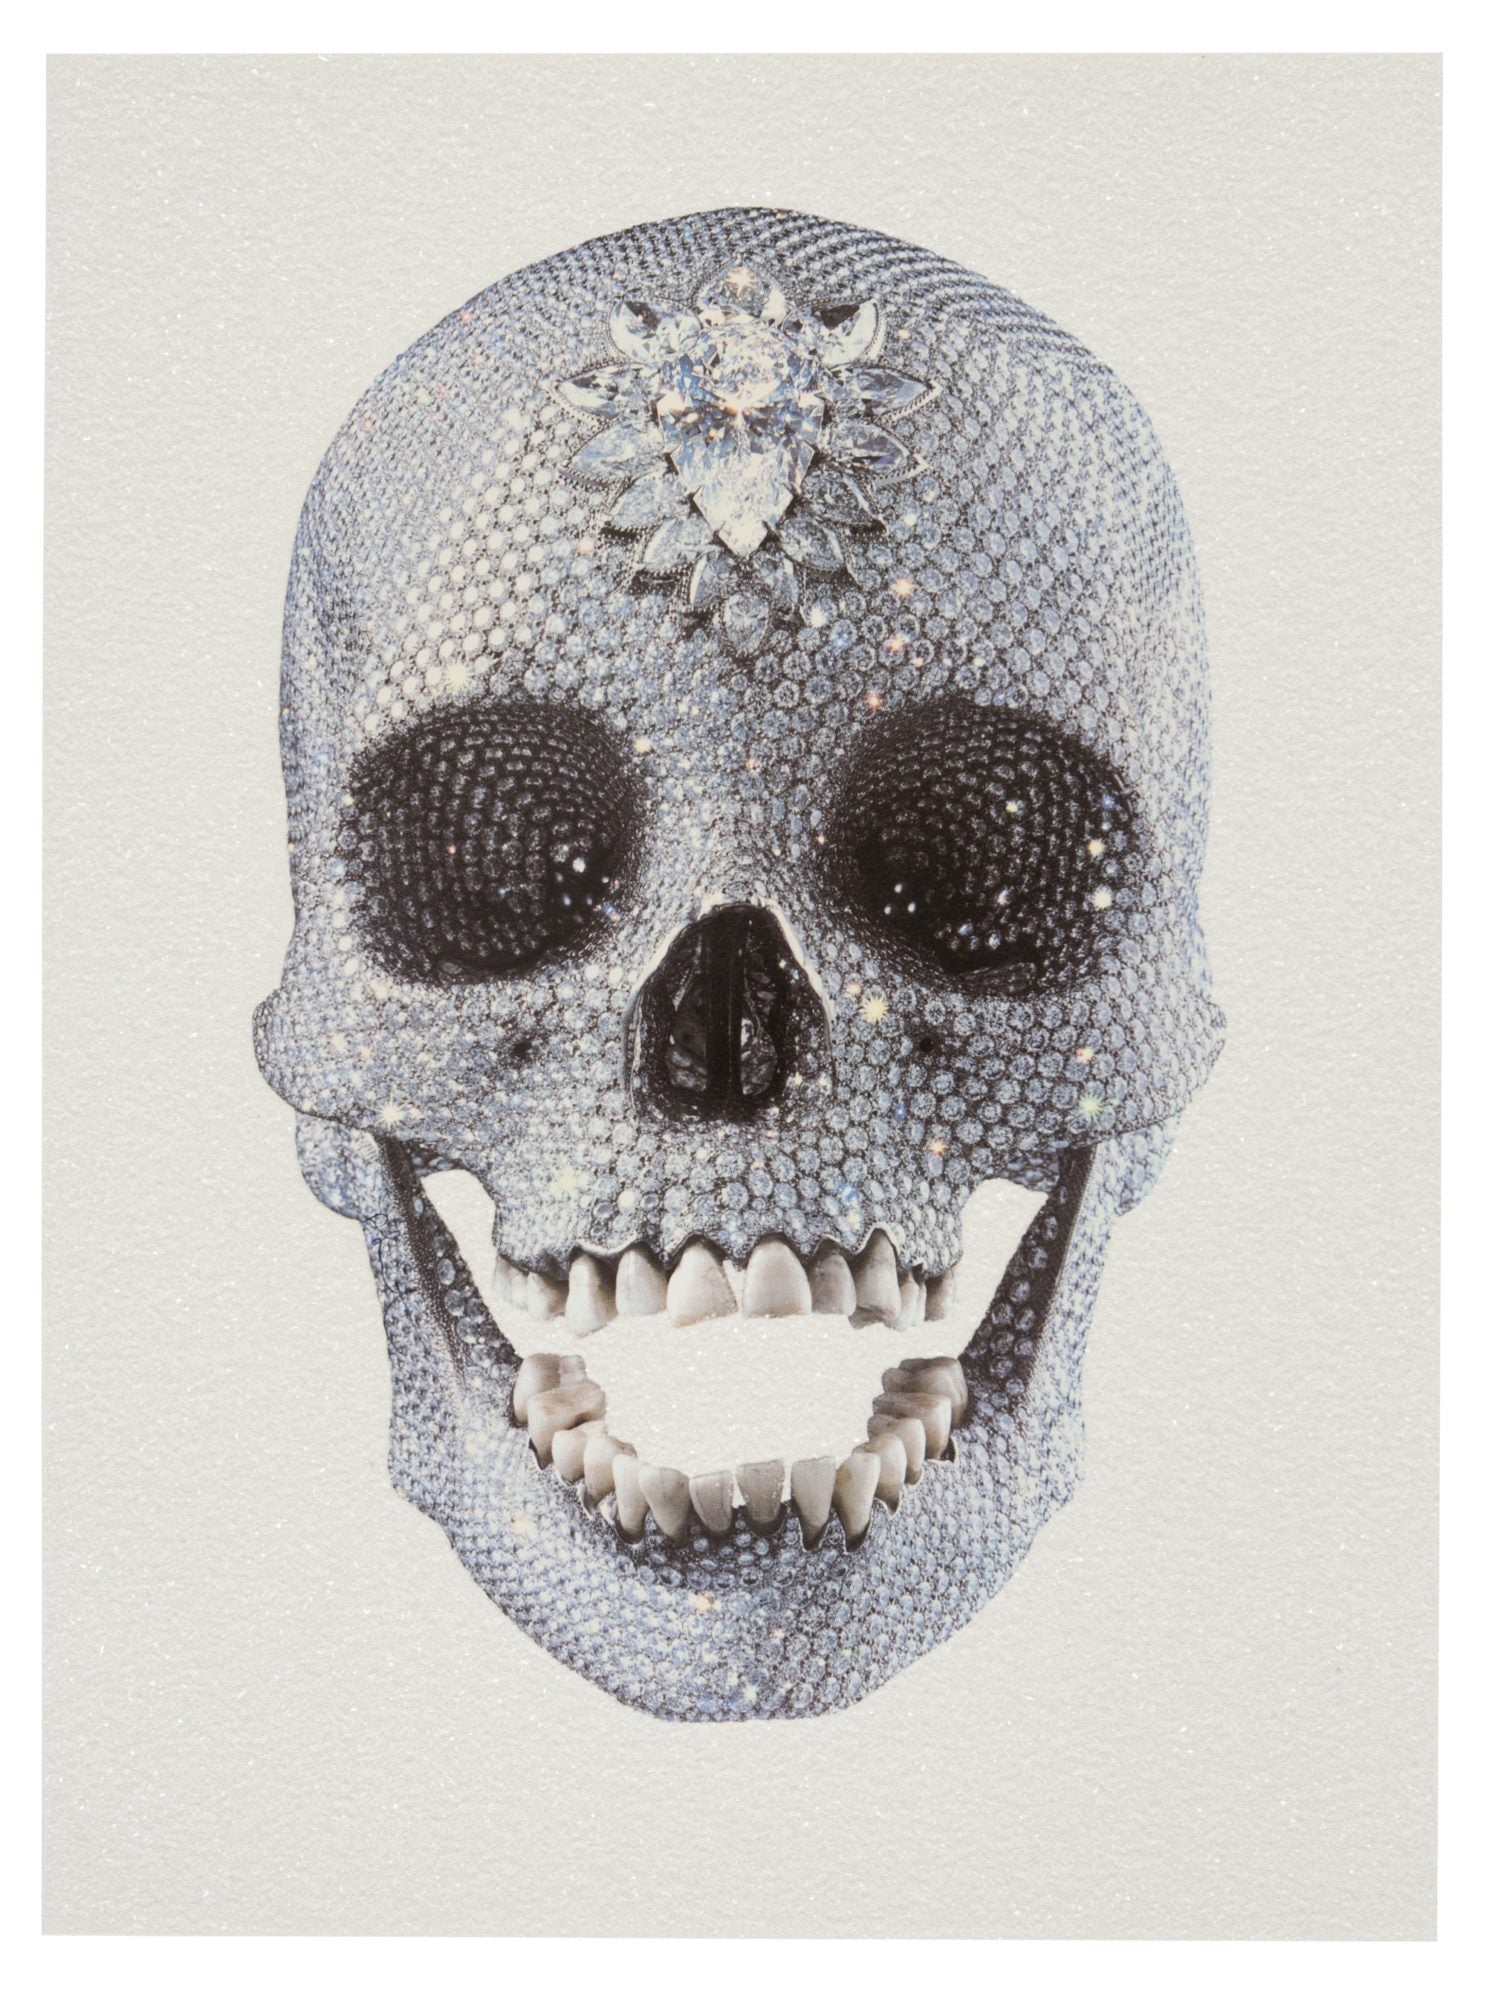 For the love of god front (white), 2011 by Damien Hirst